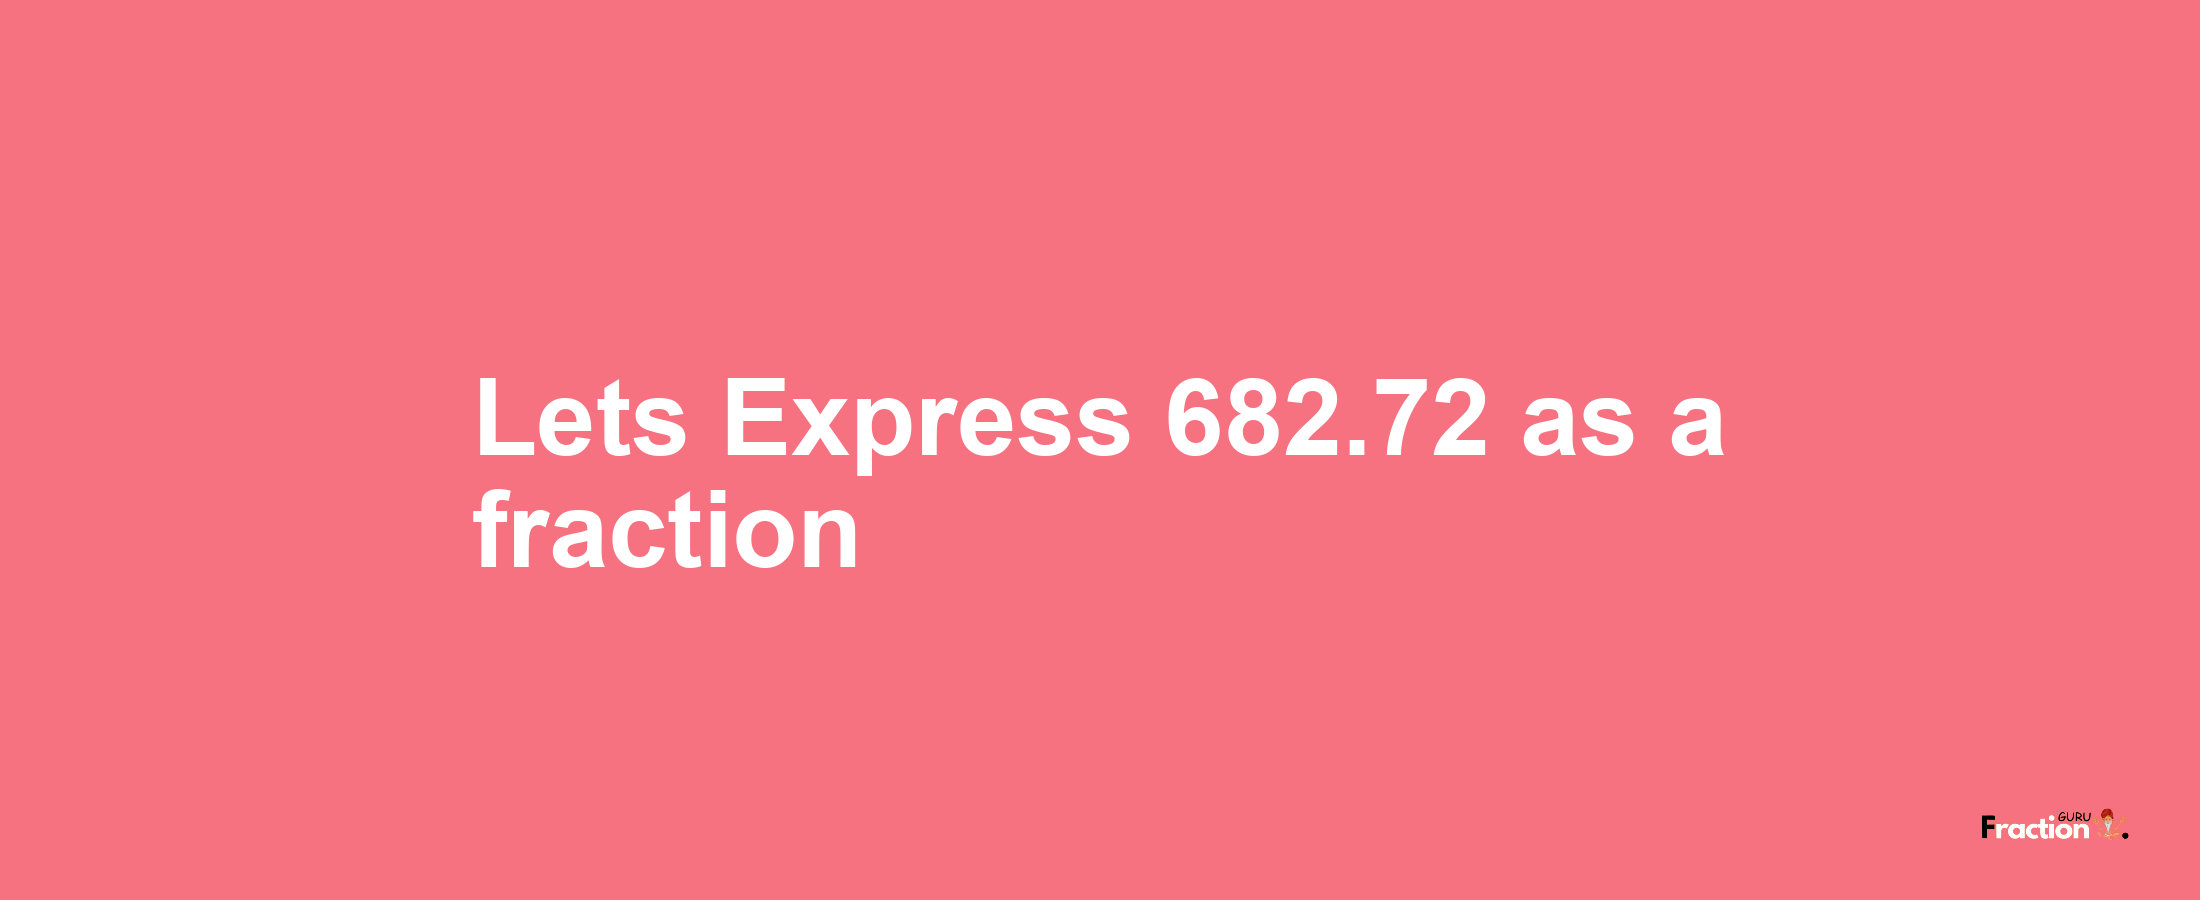 Lets Express 682.72 as afraction